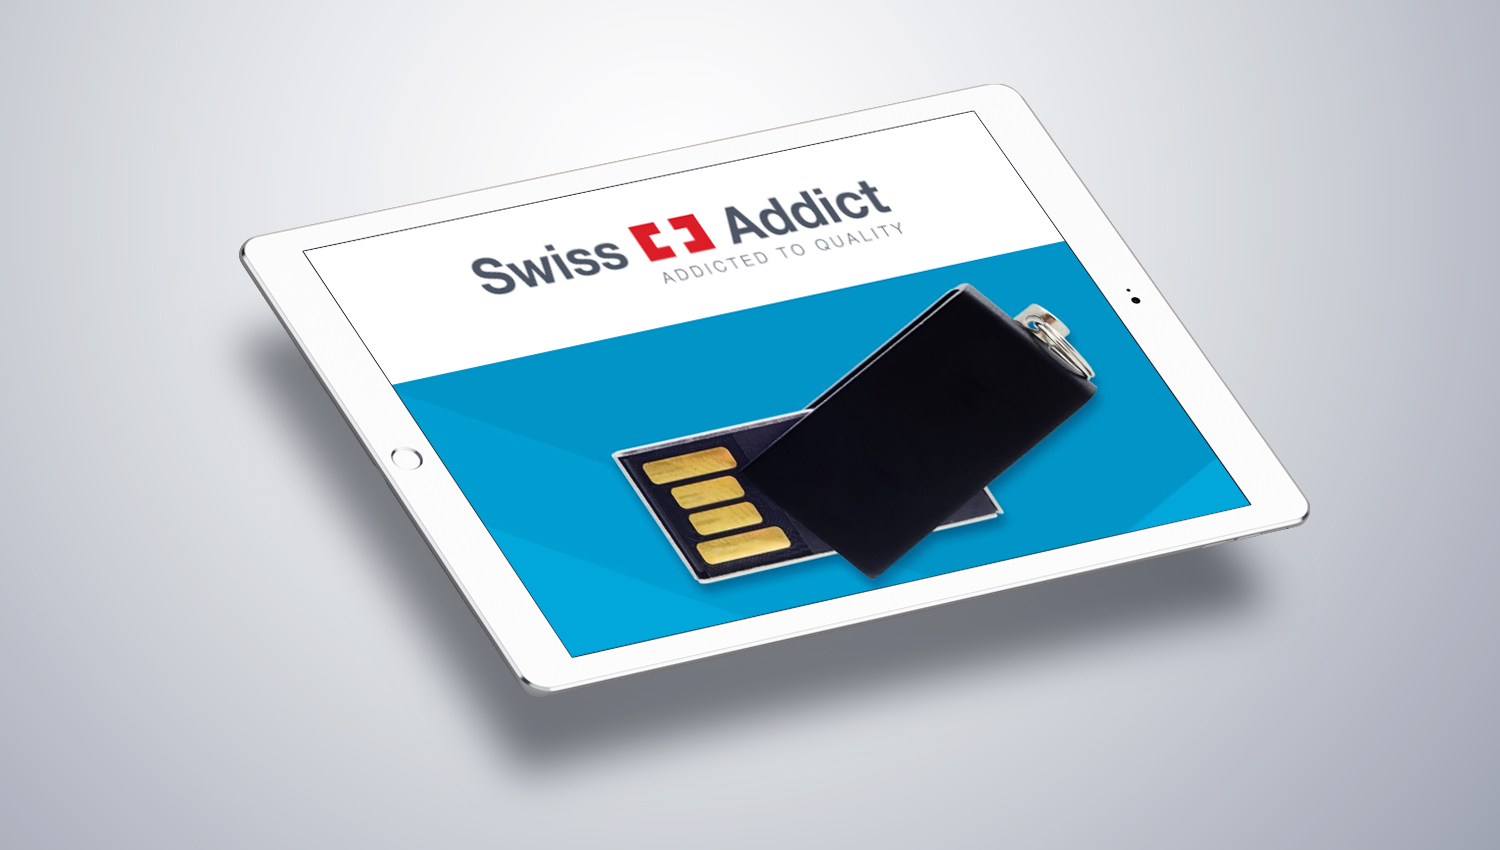 Web design tablet view for Swiss Addict 2  by 8 Ways